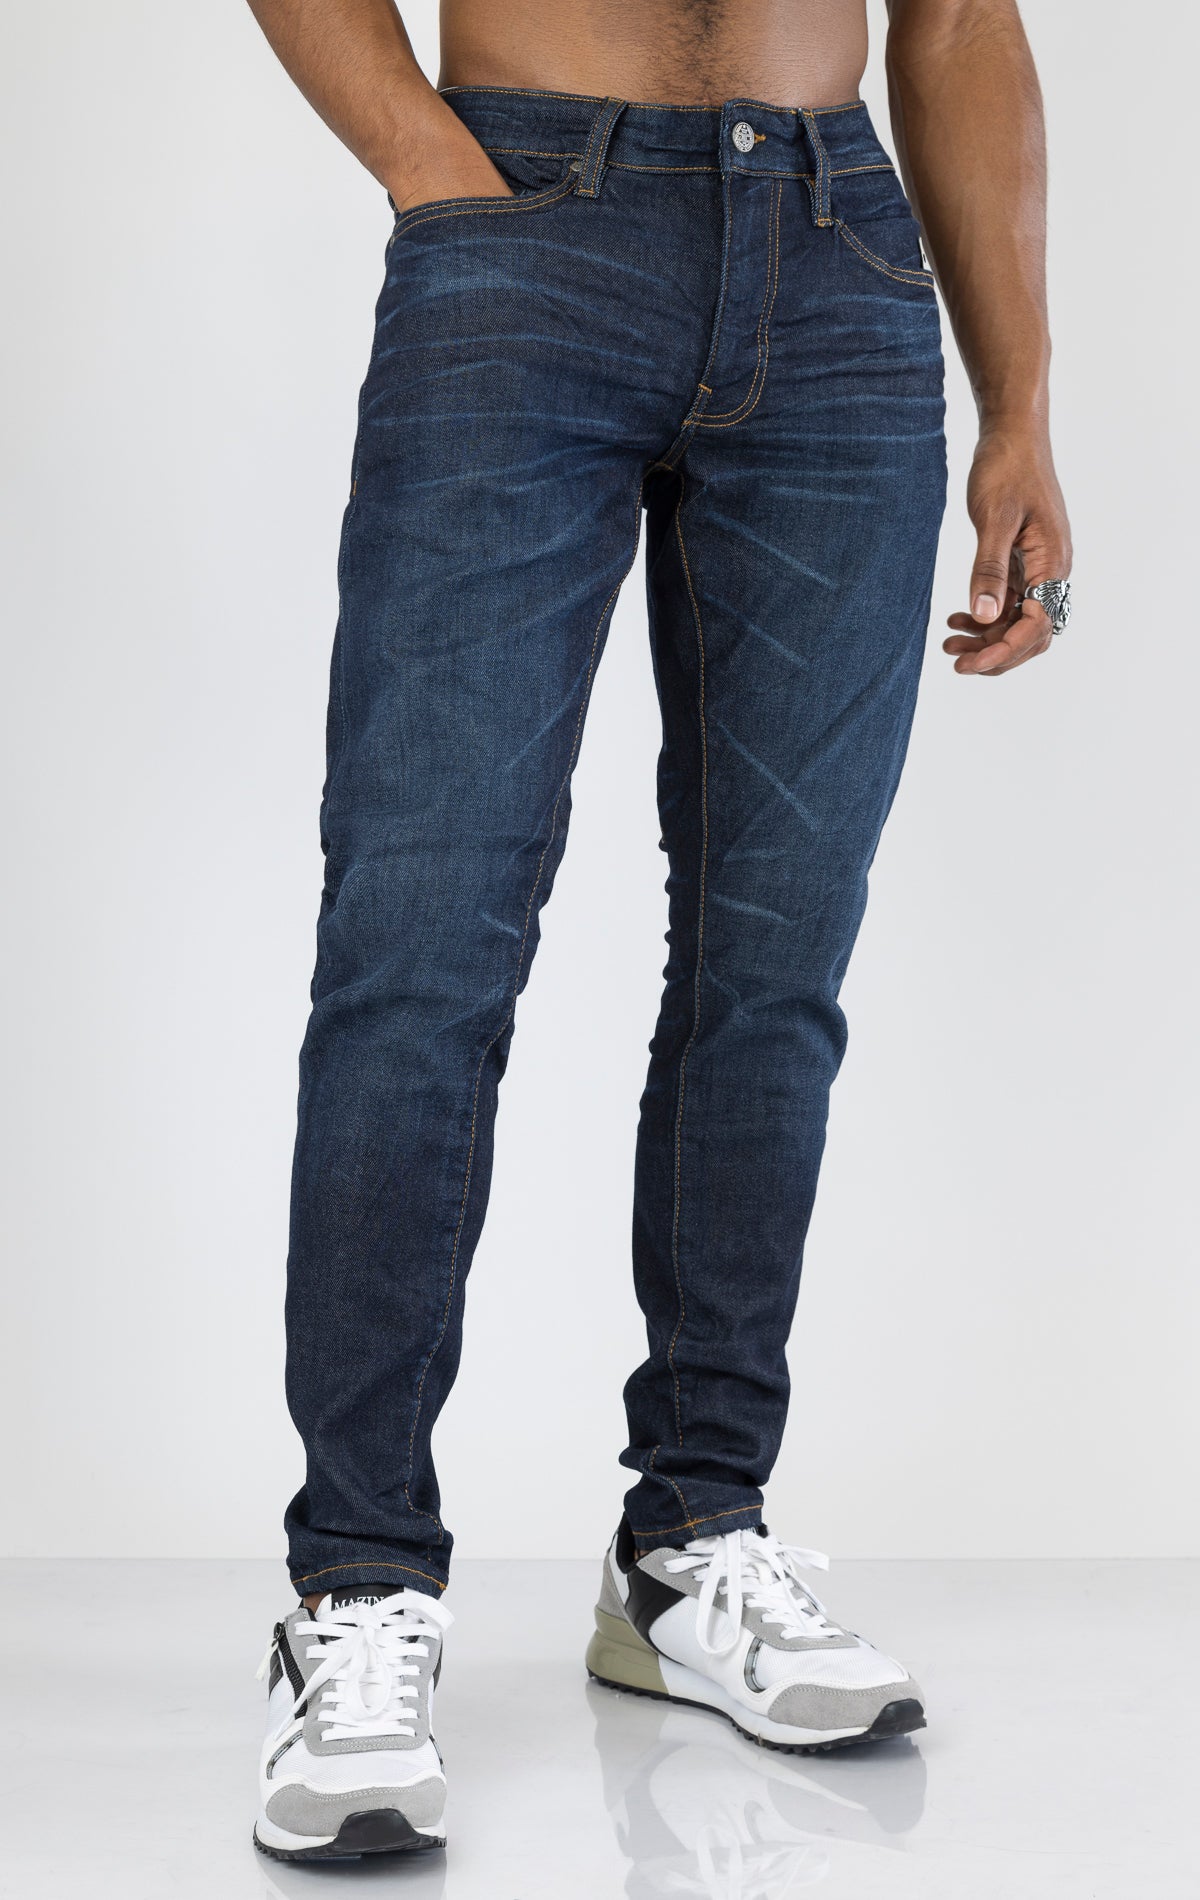 Men's Sean Slim Taper jeans in dark indigo. The jeans feature a regular rise waist, a comfortable fit from waist to thigh, a slim taper from knee to ankle, 3D baked wrinkles for texture, a raw denim look, and are made from a super stretch fabric blend (35% Cotton, 30% Polyester, 34% Tencel and 1% Elastane).